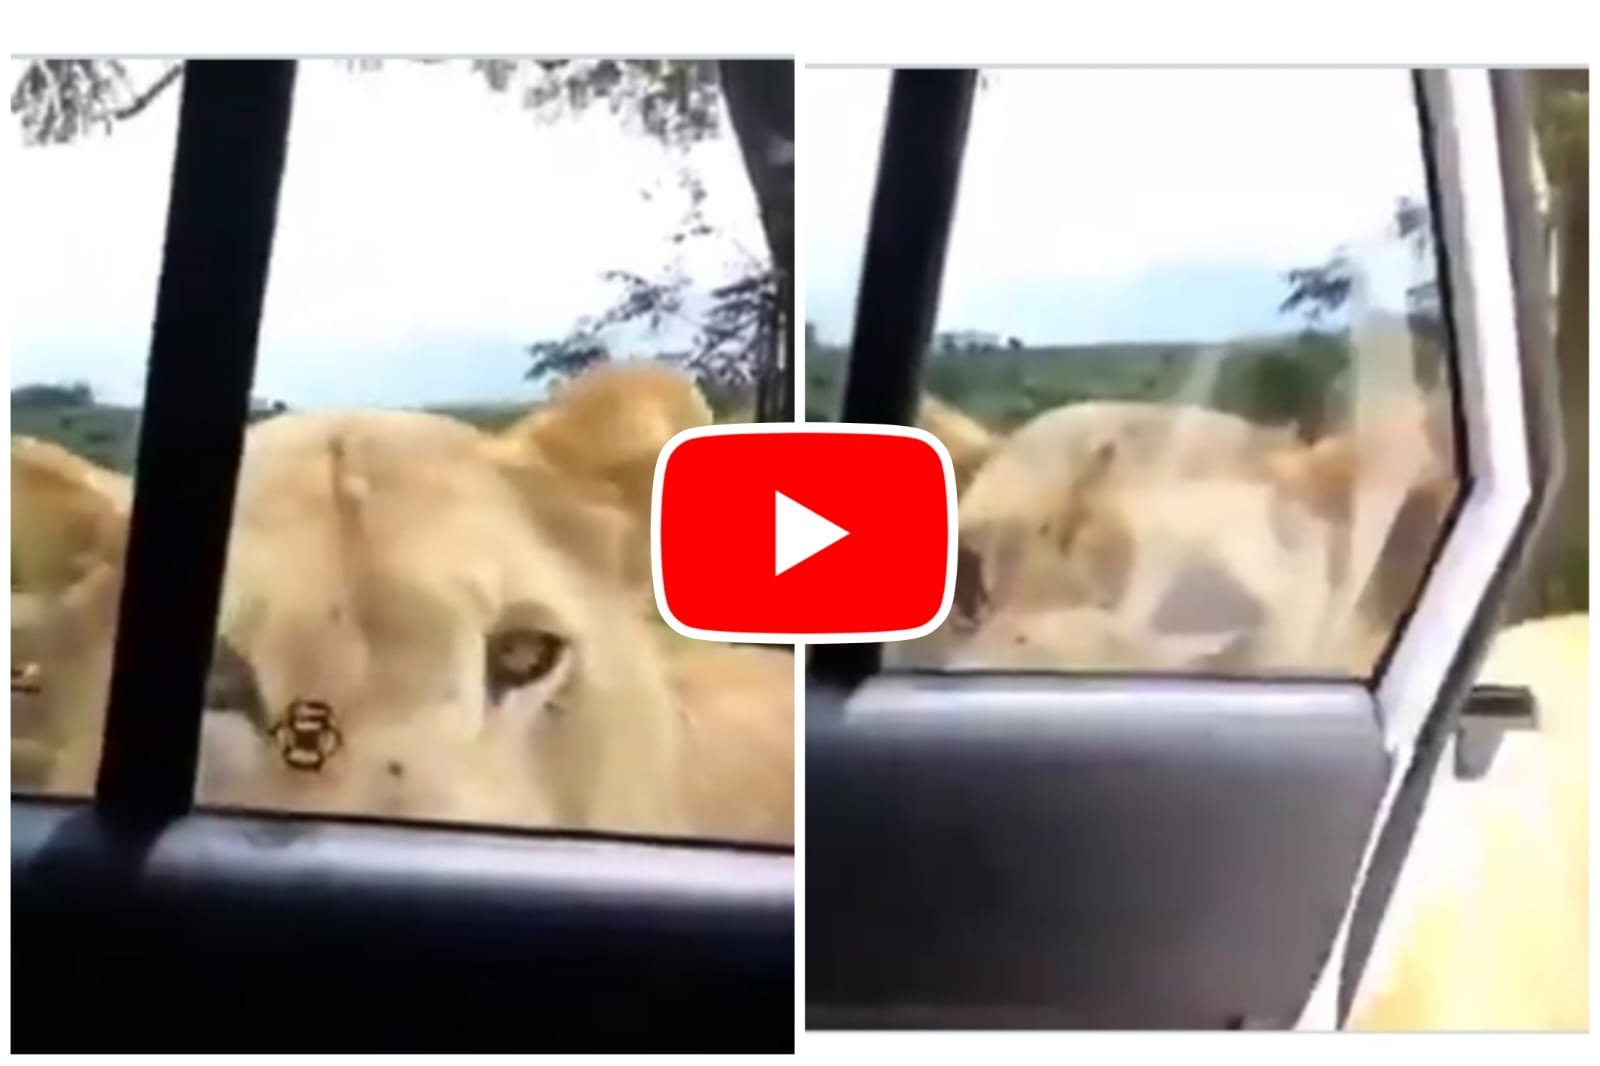 Sherni Ka Video: As soon as the ferocious lioness opened the car door, her life got stuck in her throat.